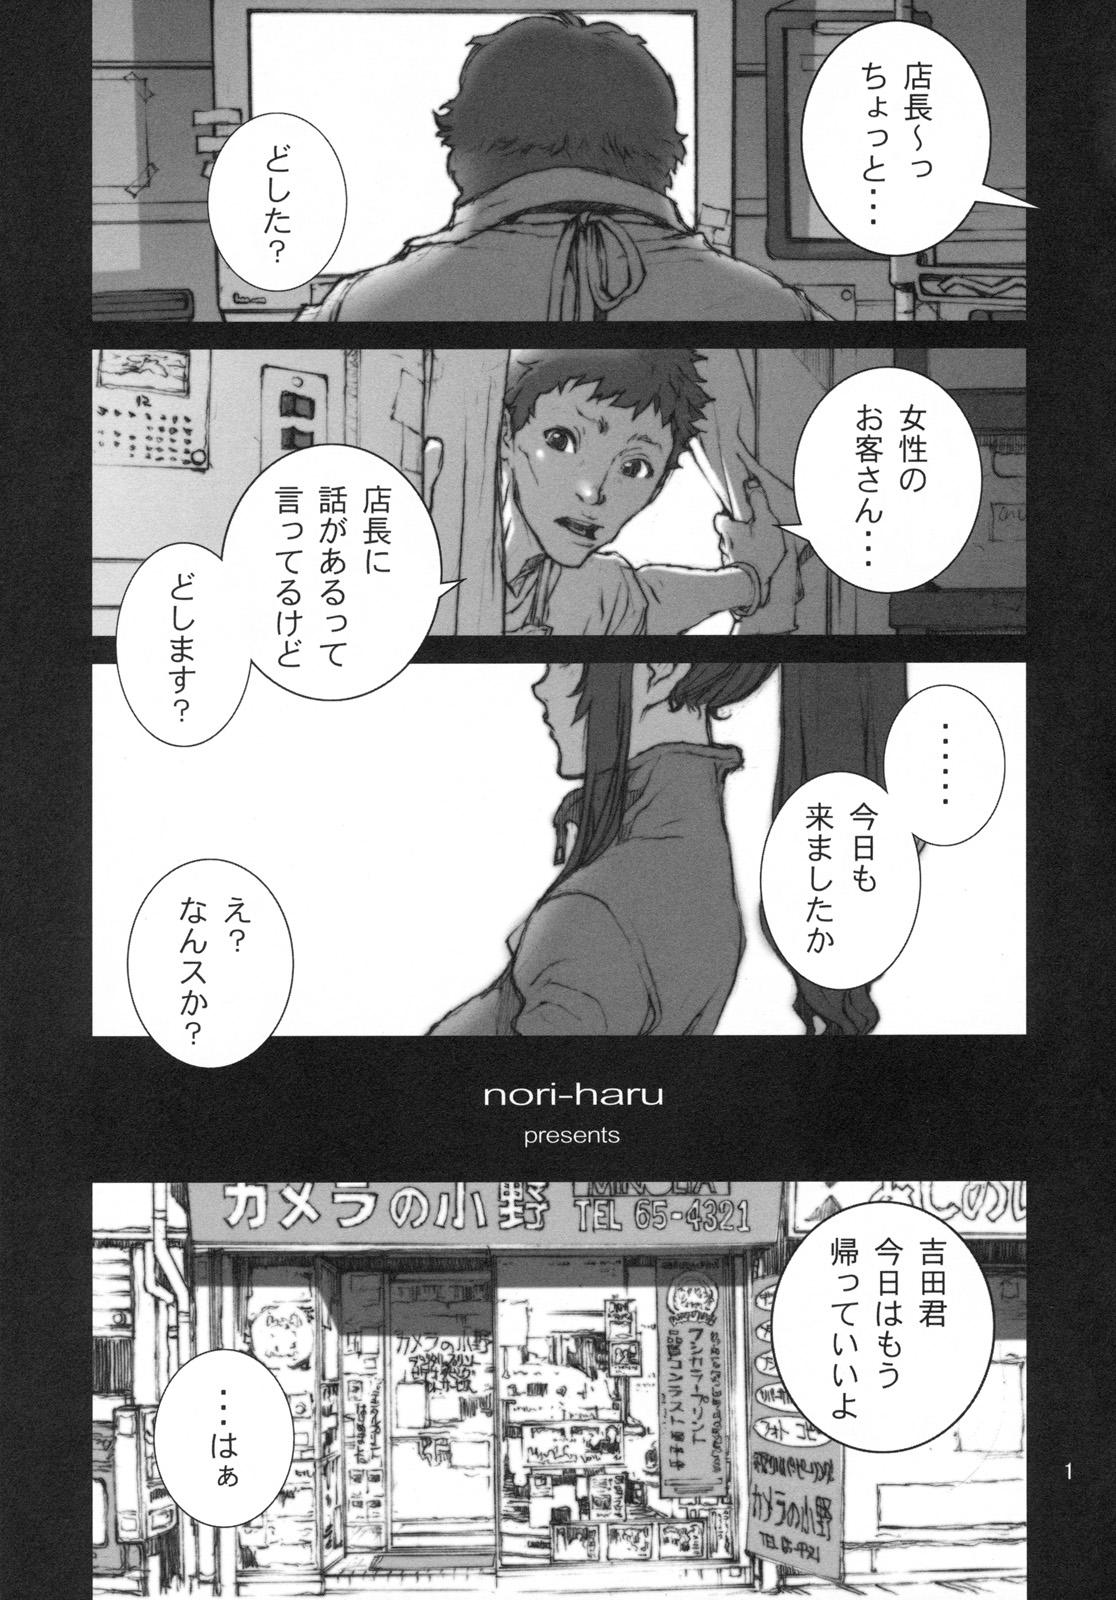 Hidden Camera Kachousen San - King of fighters Stretching - Page 2